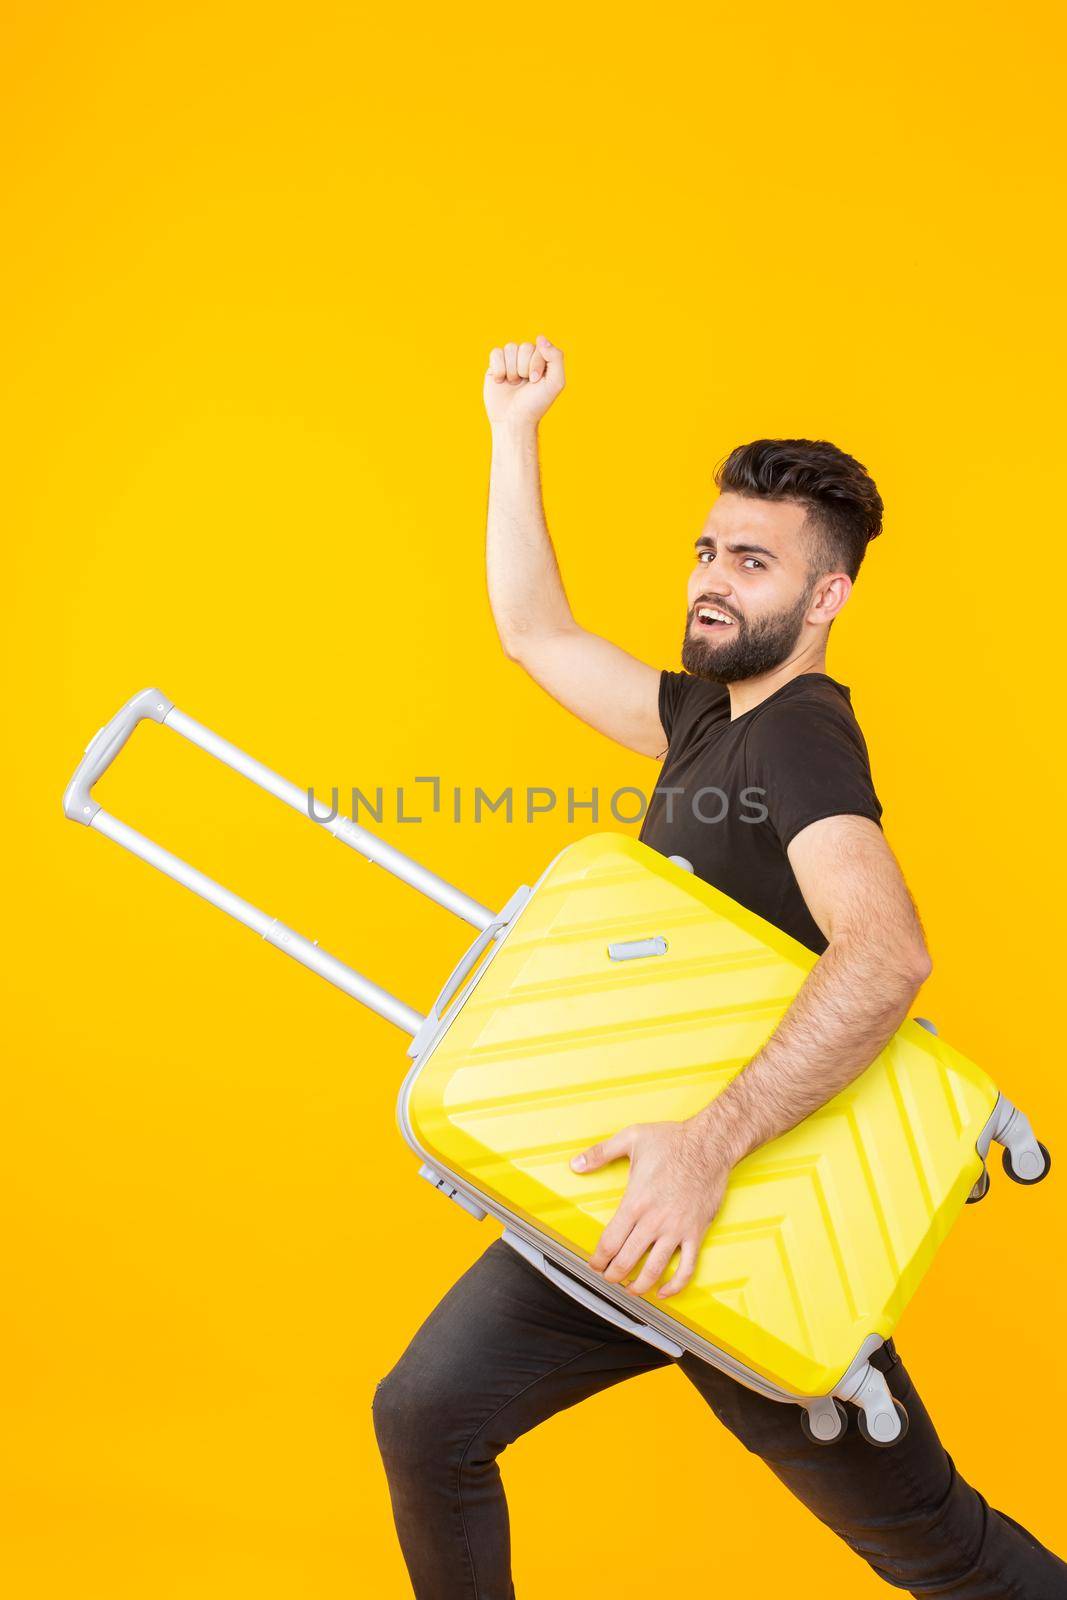 Cute pretty young arab man with a beard holding a yellow suitcase in his hands on a yellow background. Concept of travel and vacations by Satura86